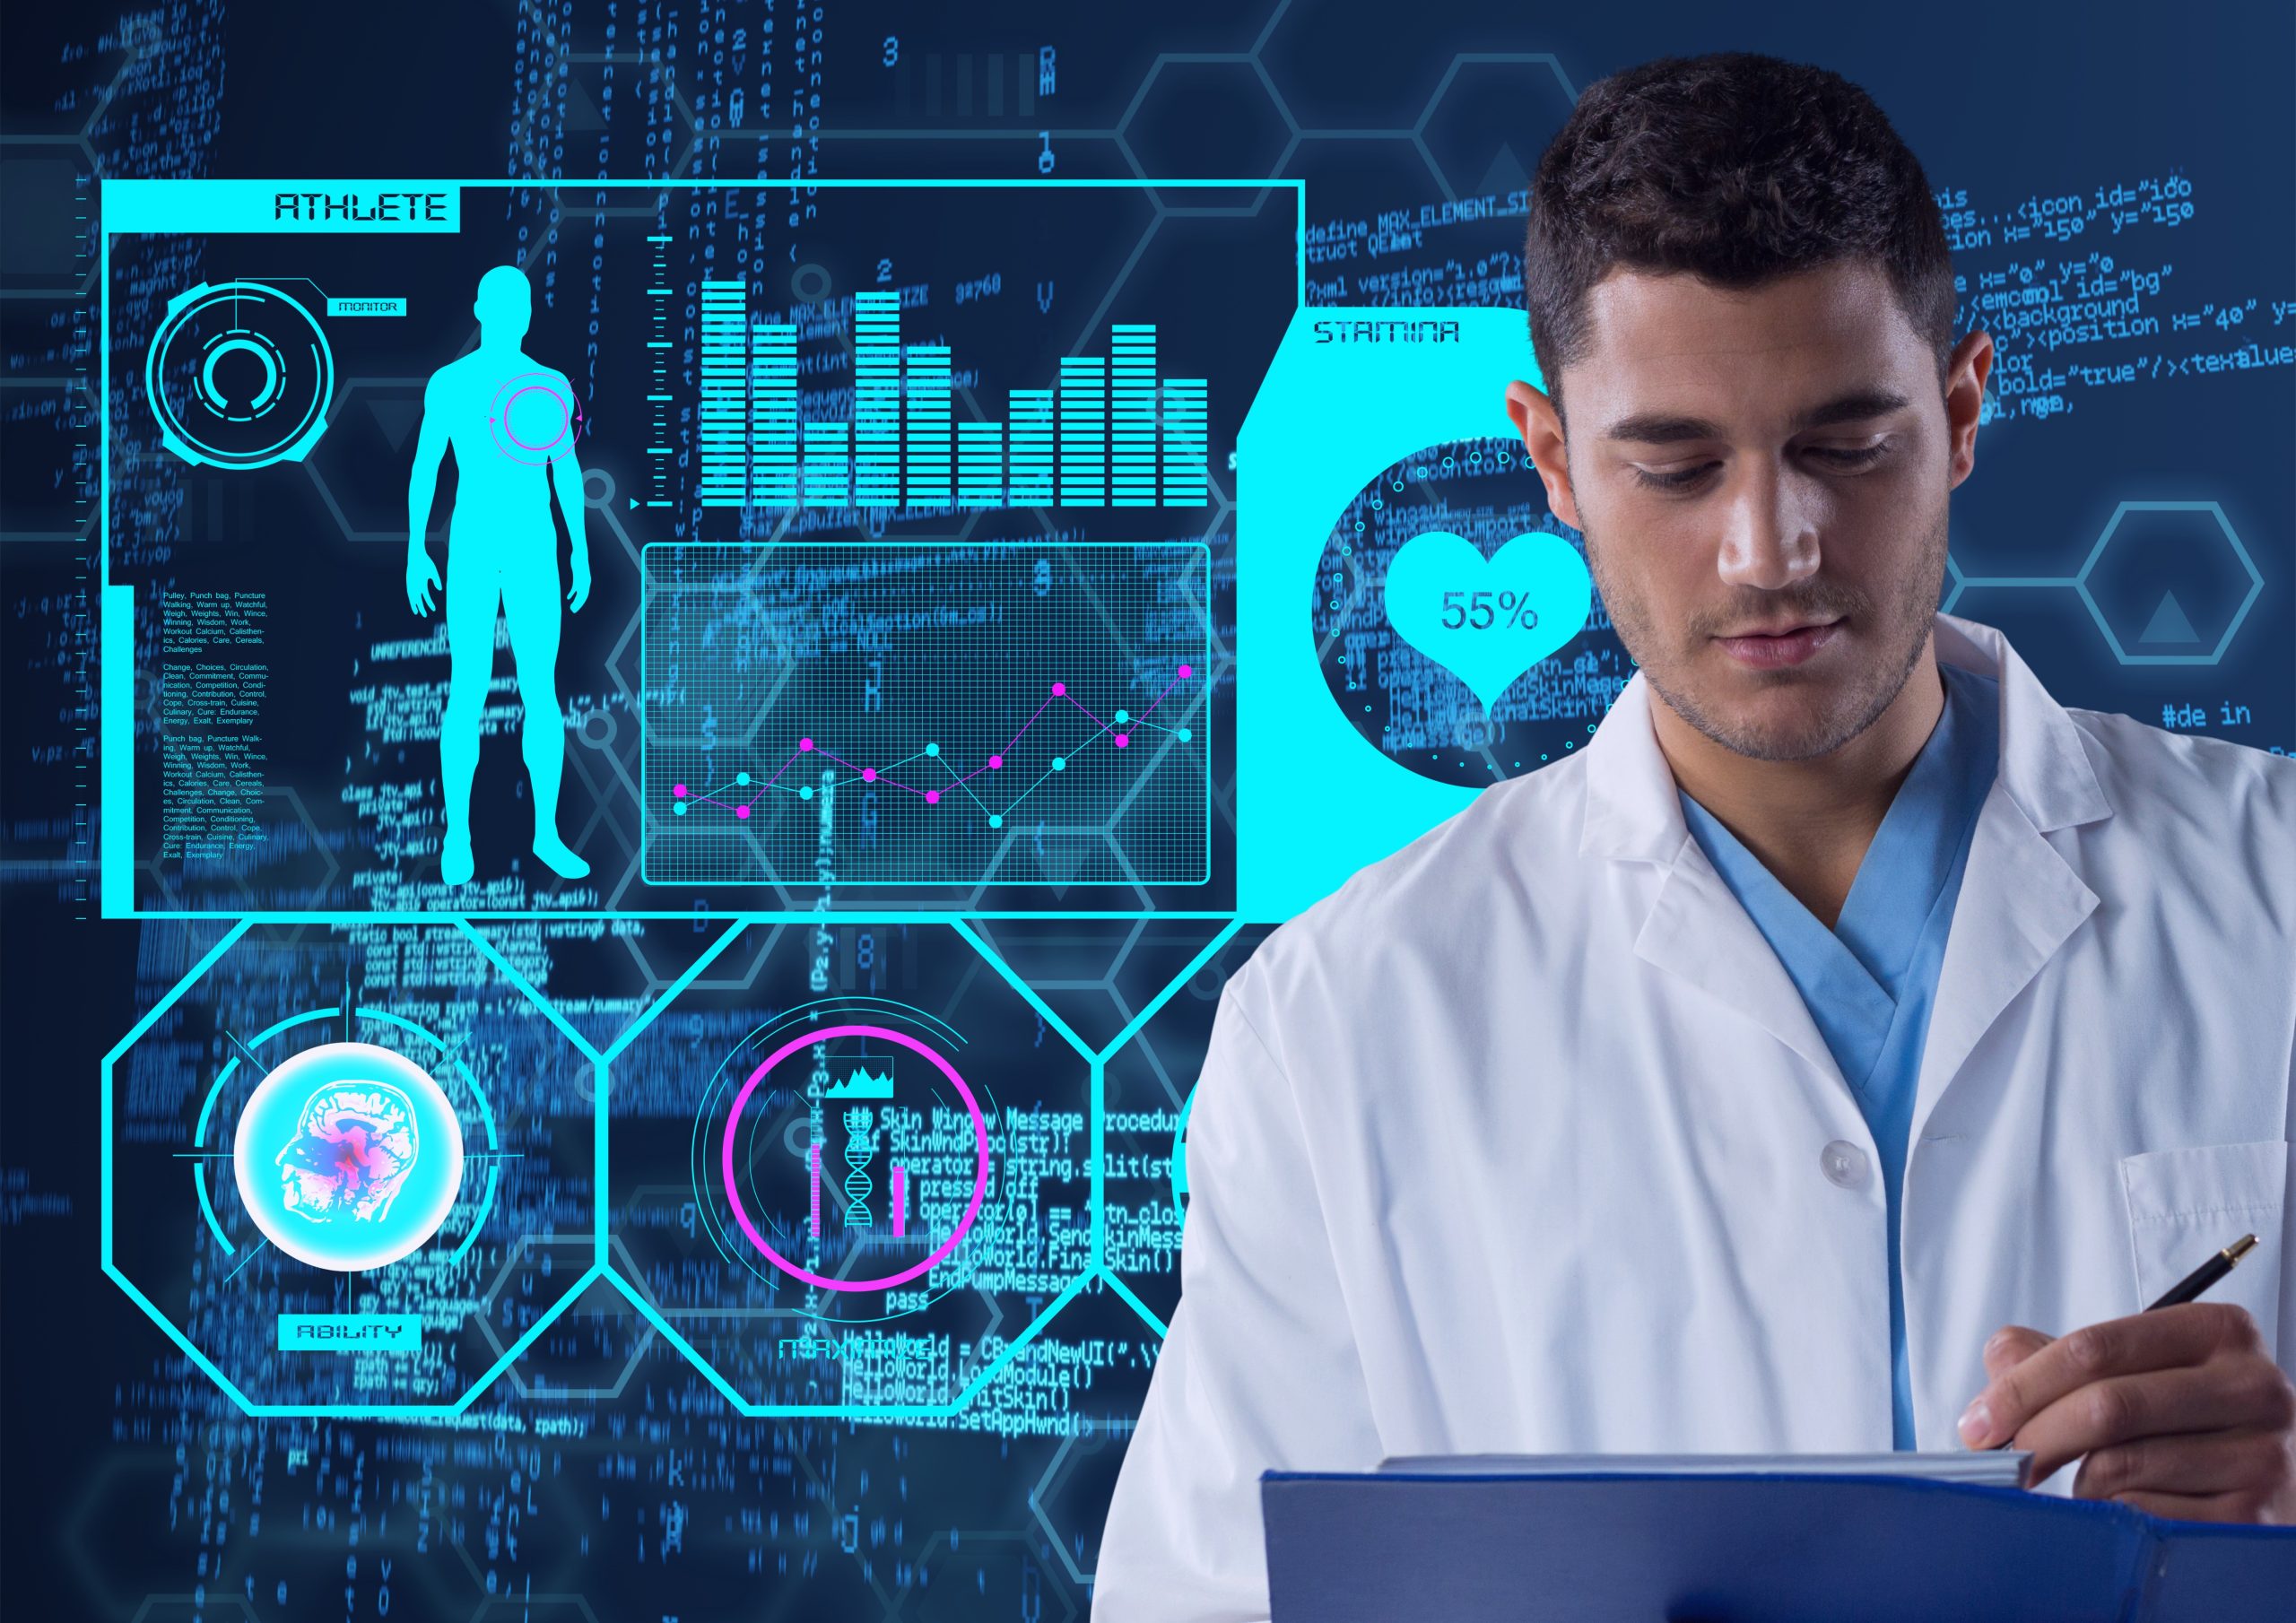 Role of AI and Machine Learning in Digital Health